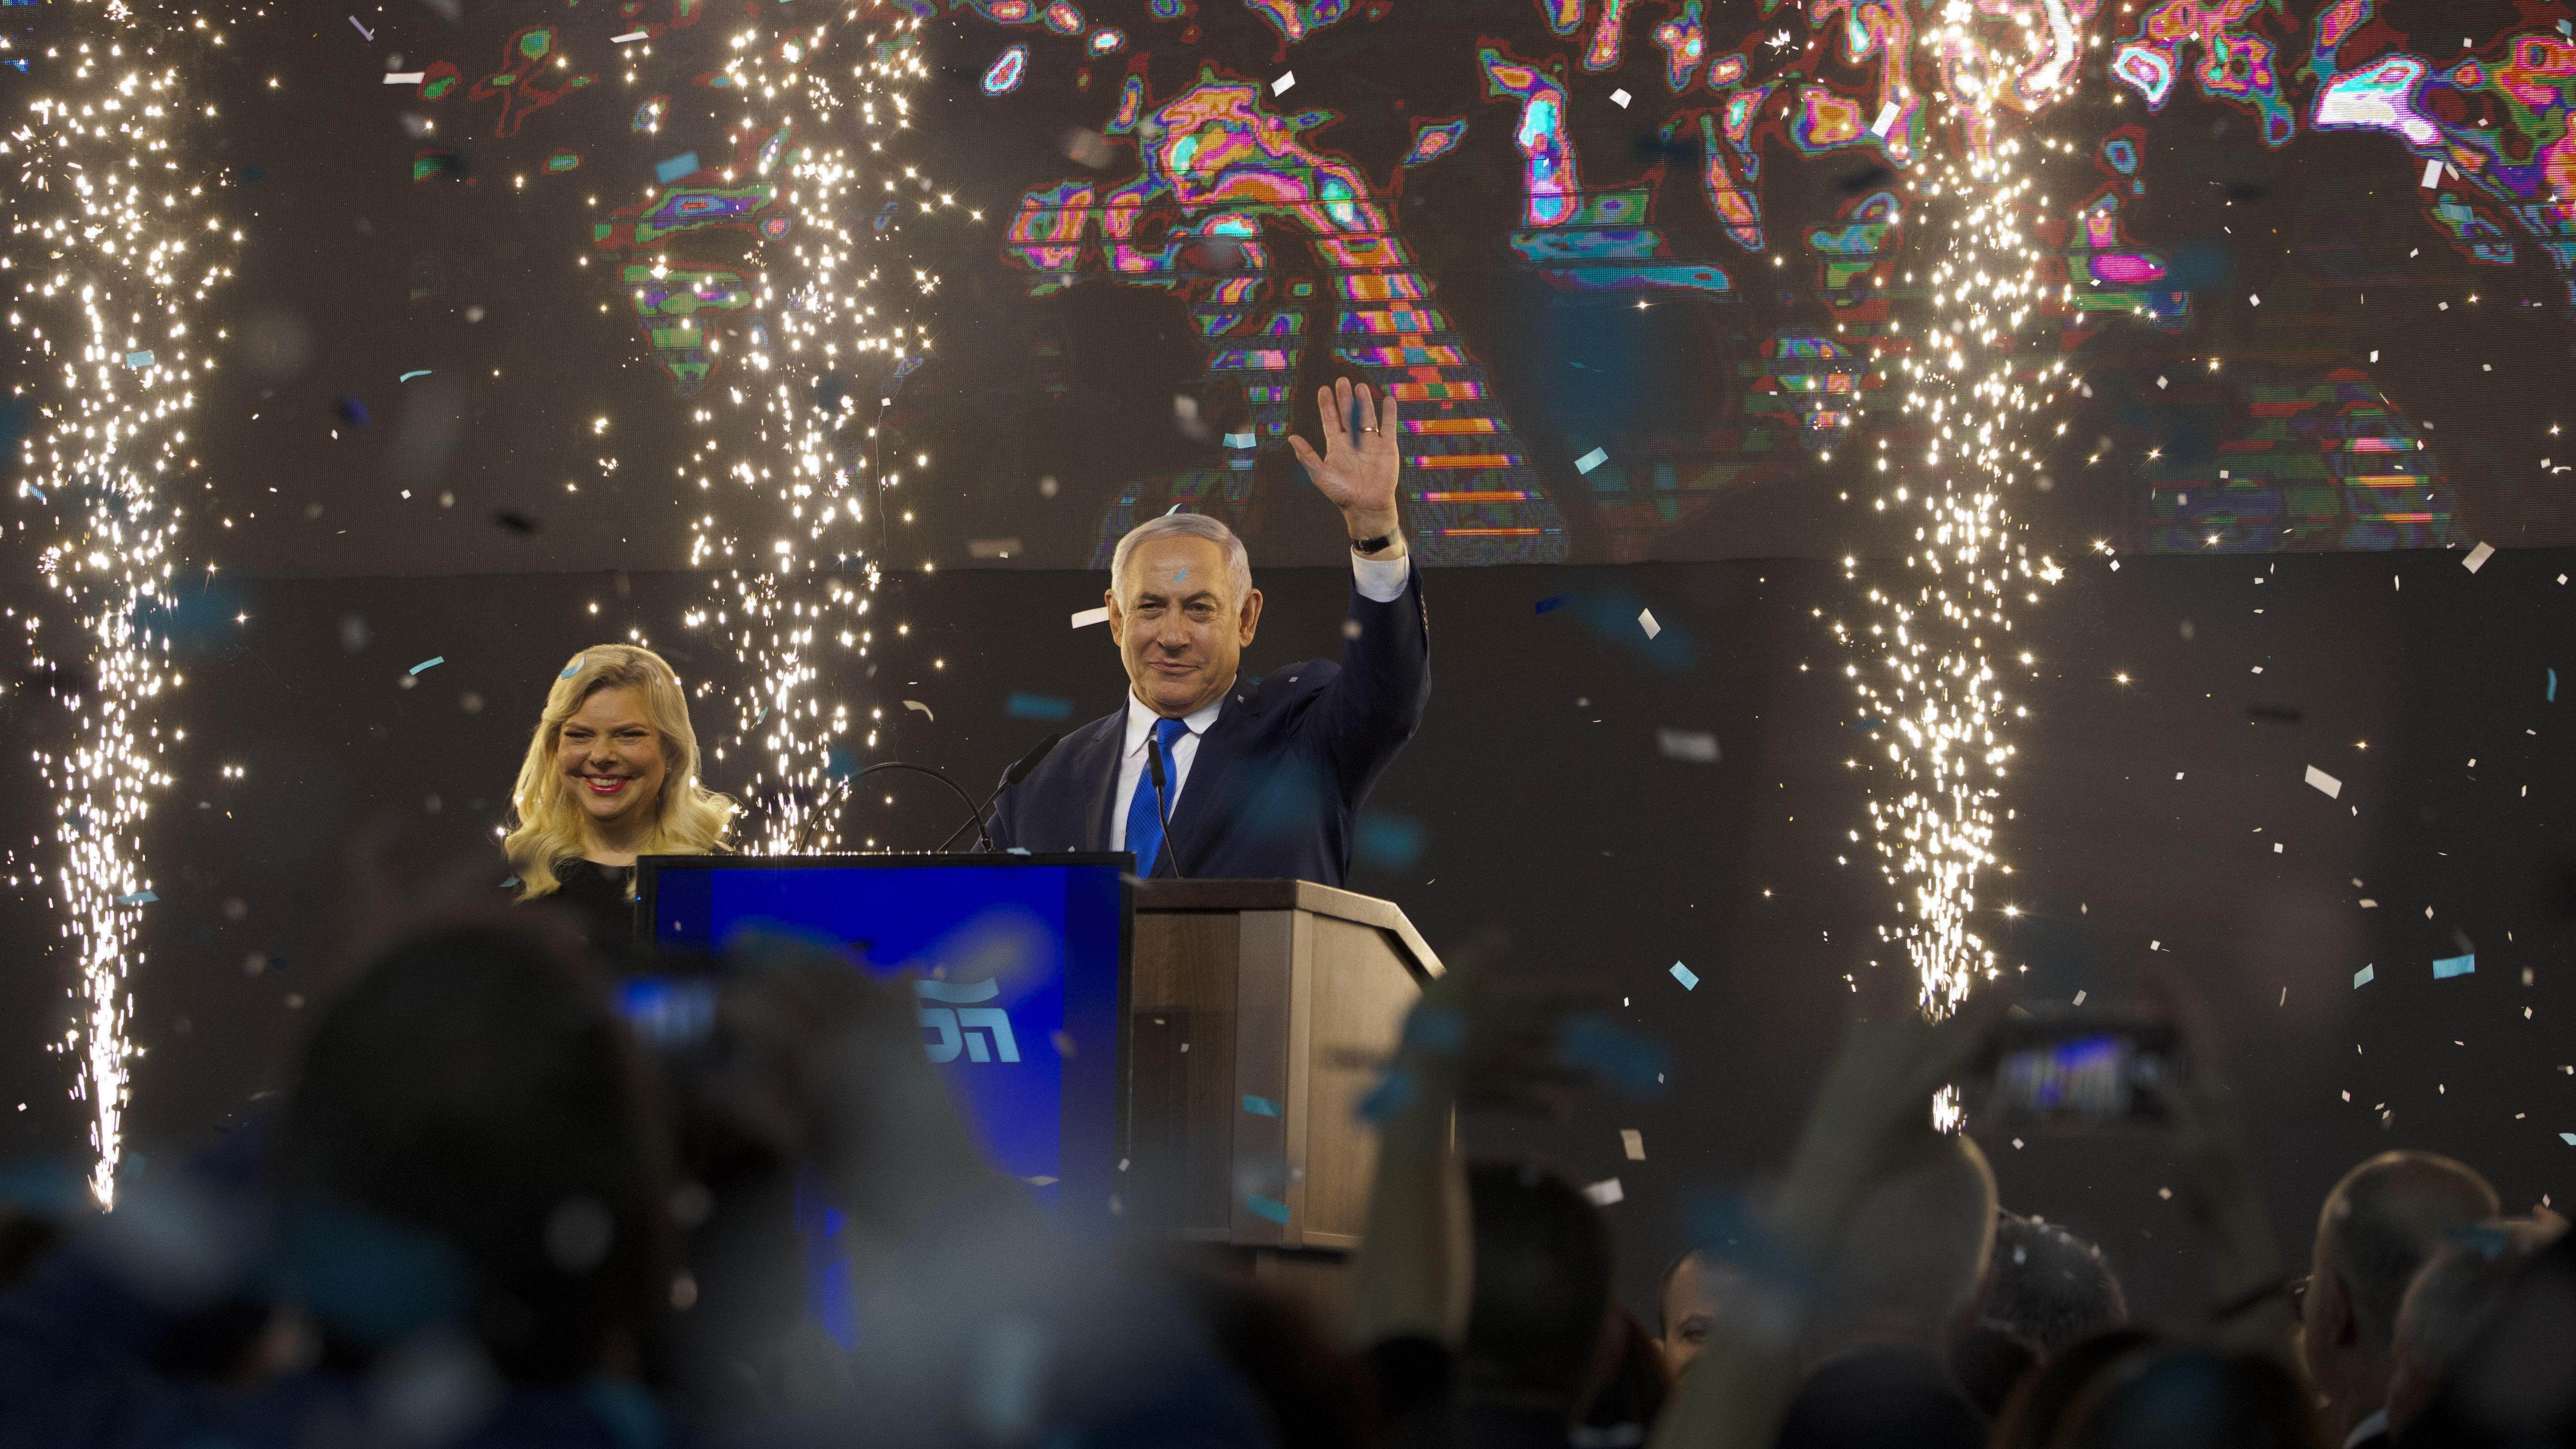 Israel's Prime Minister Benjamin Netanyahu accompanied by his wife Sara waves to his supporters after polls for Israel's general elections closed in Tel Aviv, Israel, Wednesday, April 10, 2019.